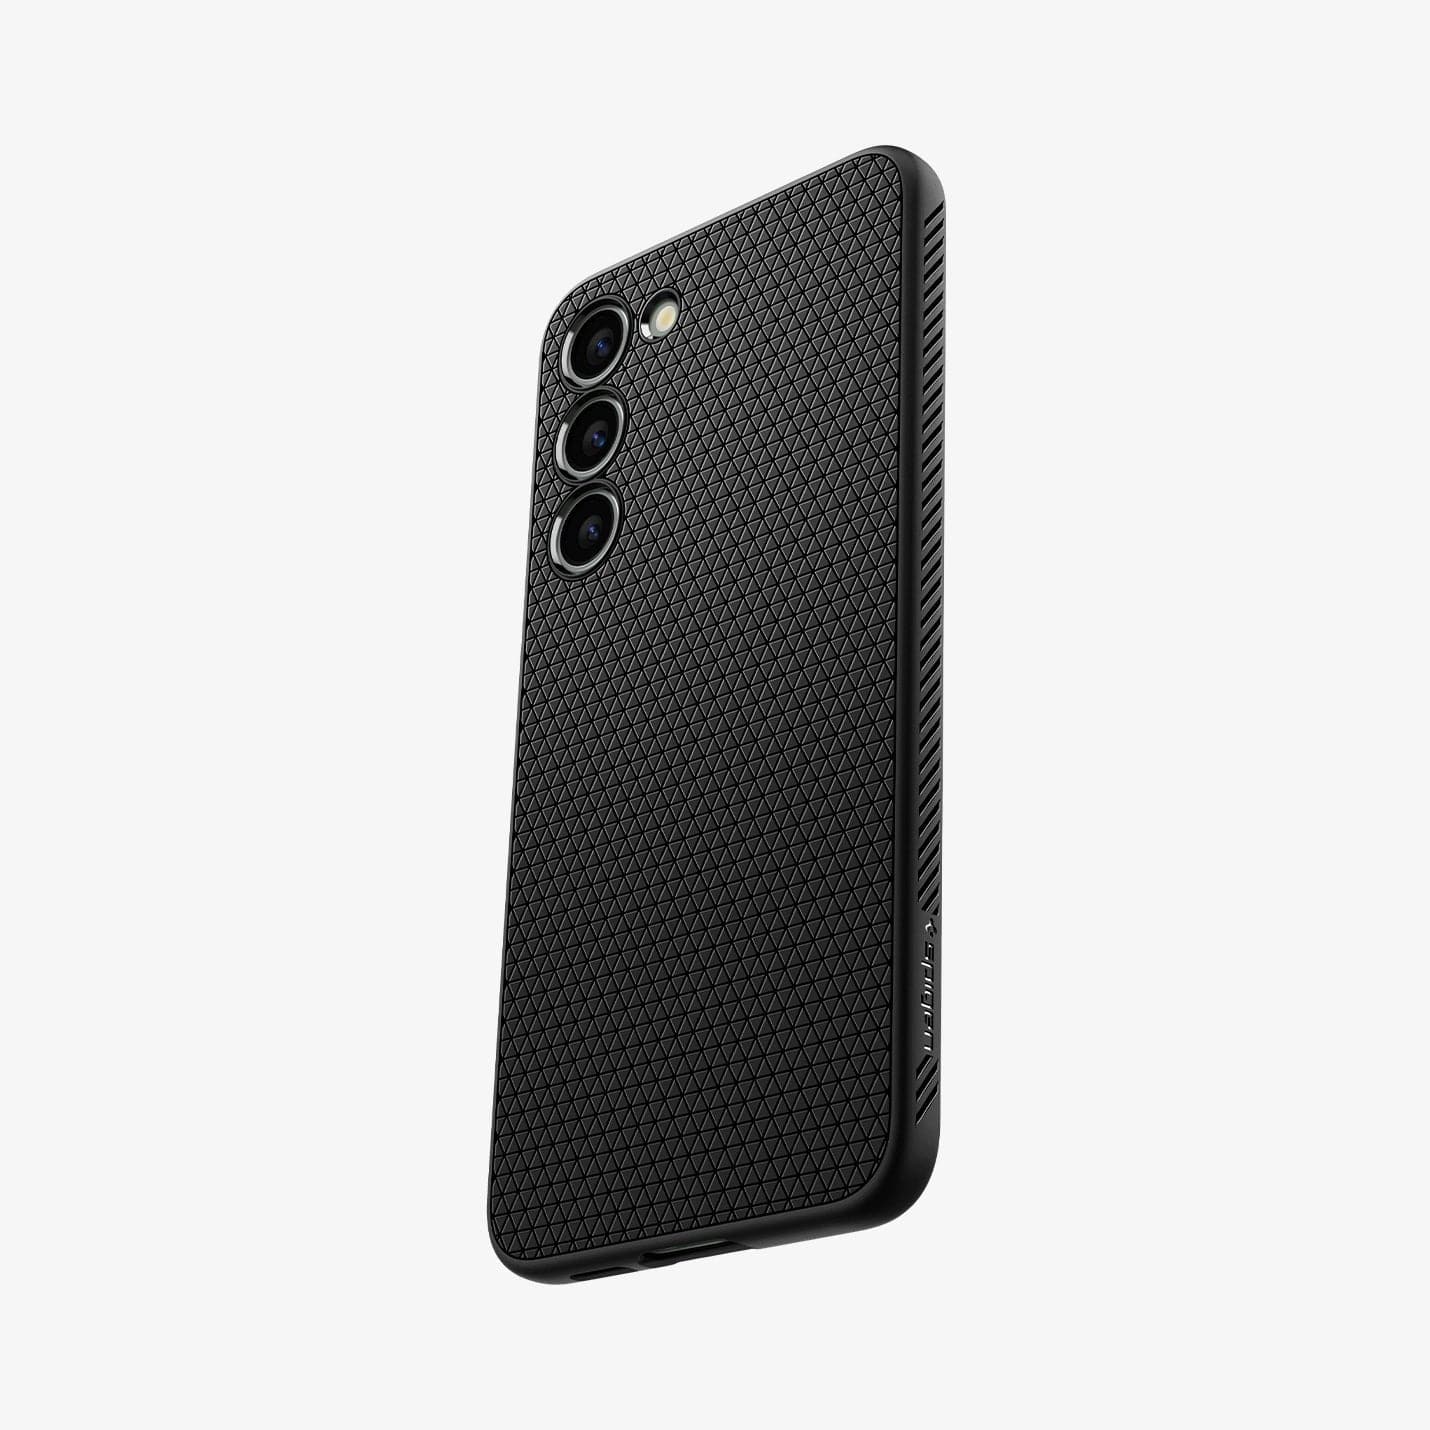 ACS05666 - Galaxy S23 Plus Case Liquid Air in matte black showing the back and partial side